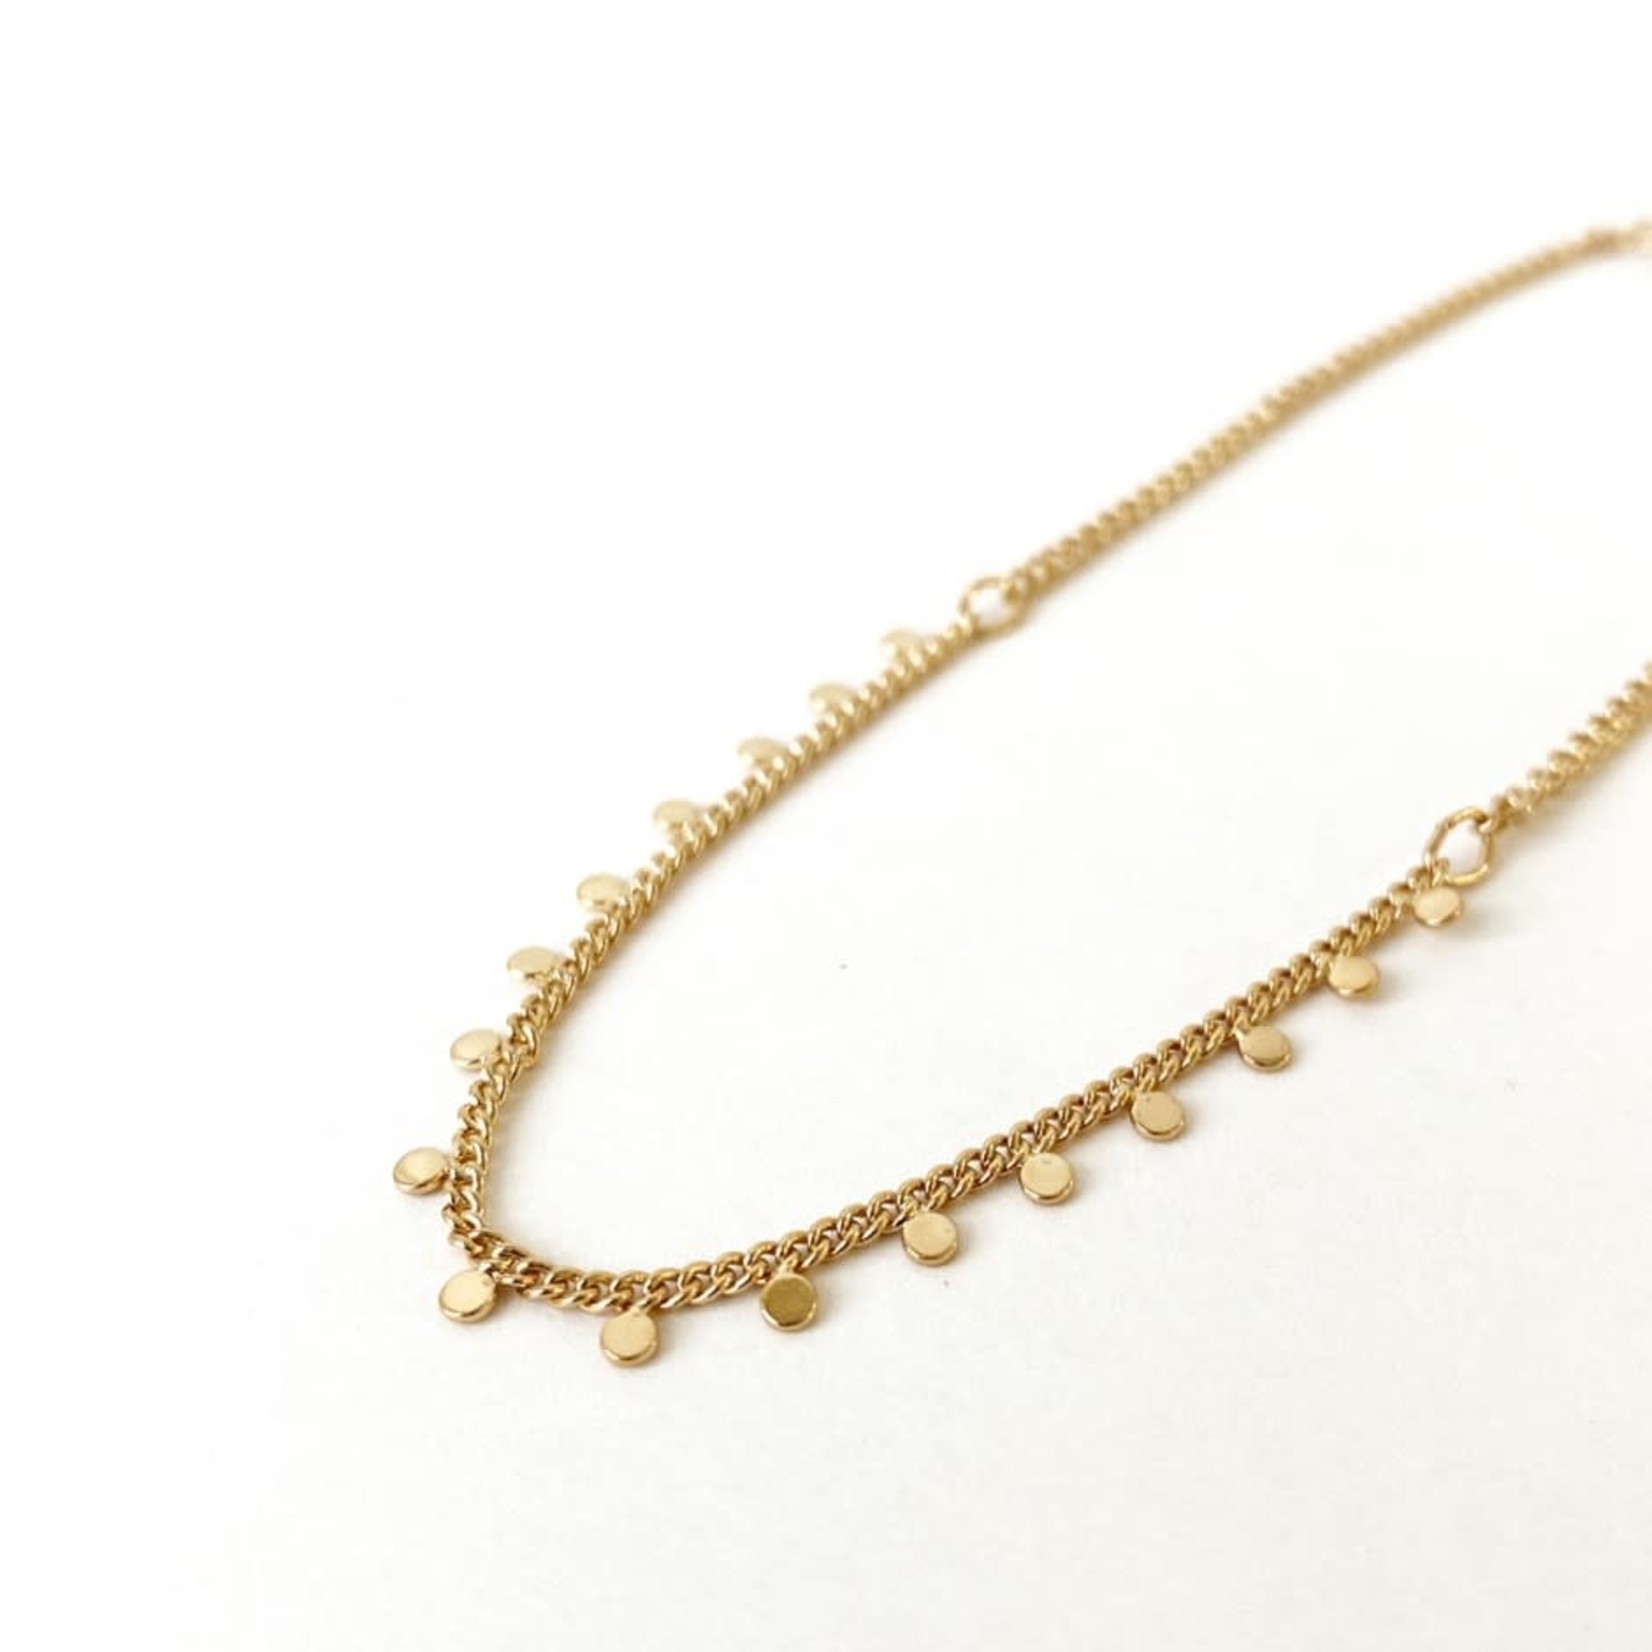 GOLD CHAIN & MINI METAL FLAT BEADS ANKLET